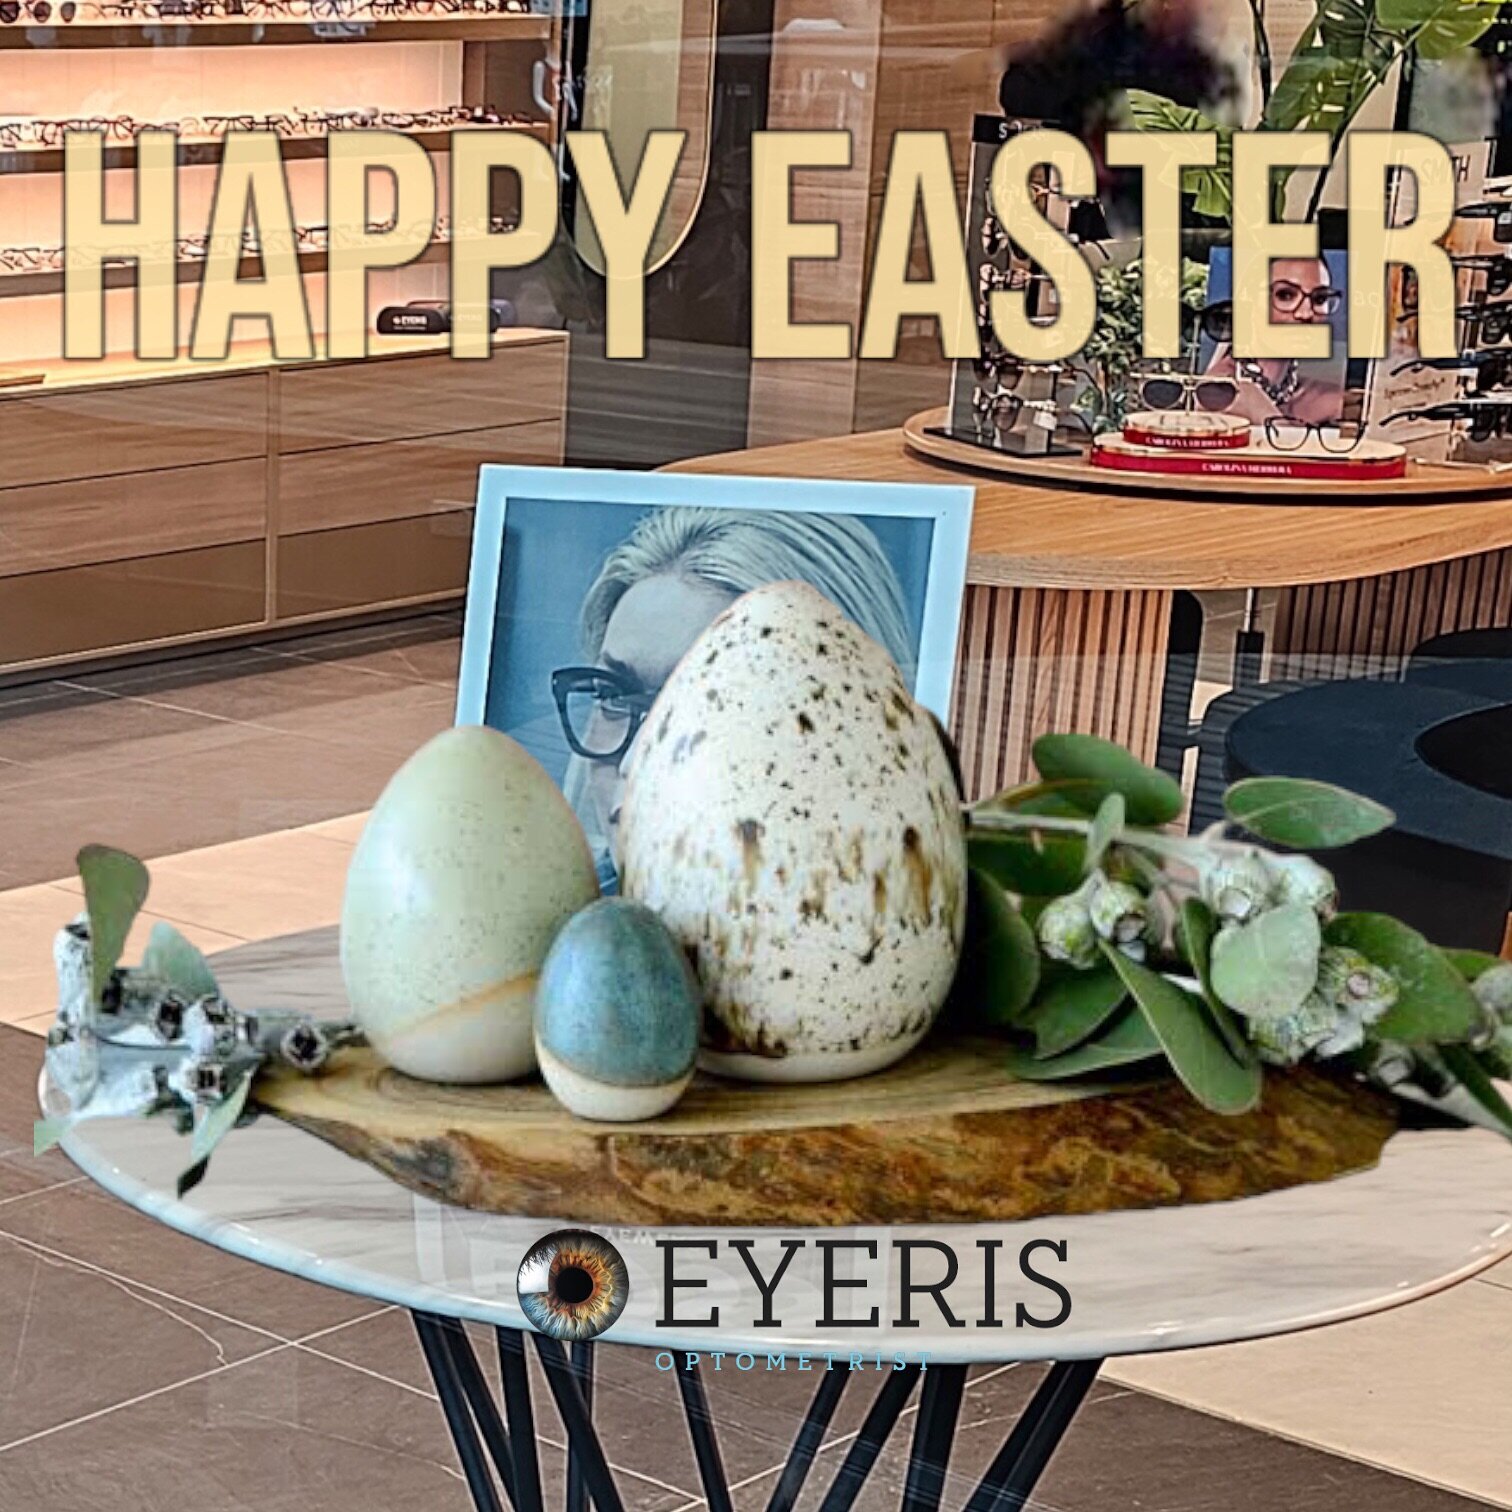 Hop into Easter with clear eyes and a bright outlook! Wishing you a basket full of joy, laughter, and perfectly focused moments from all of us at Eyeris Optometrist. Have an egg-cellent weekend! #easterweekend #marketplacegungahlin